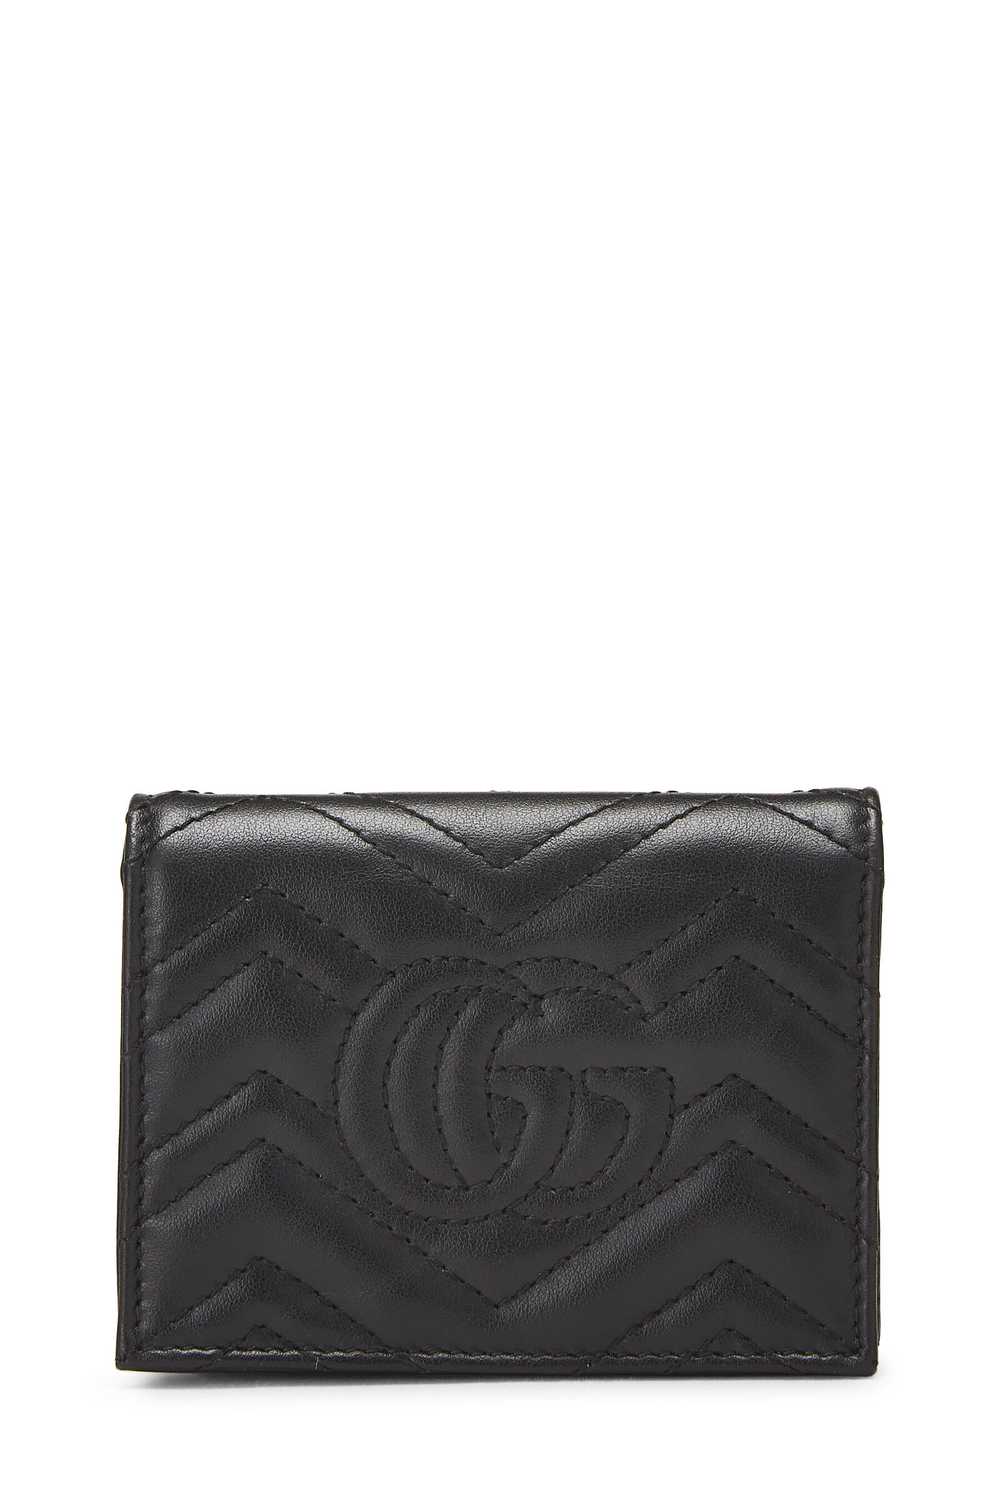 Black Leather Marmont Card Case - image 3